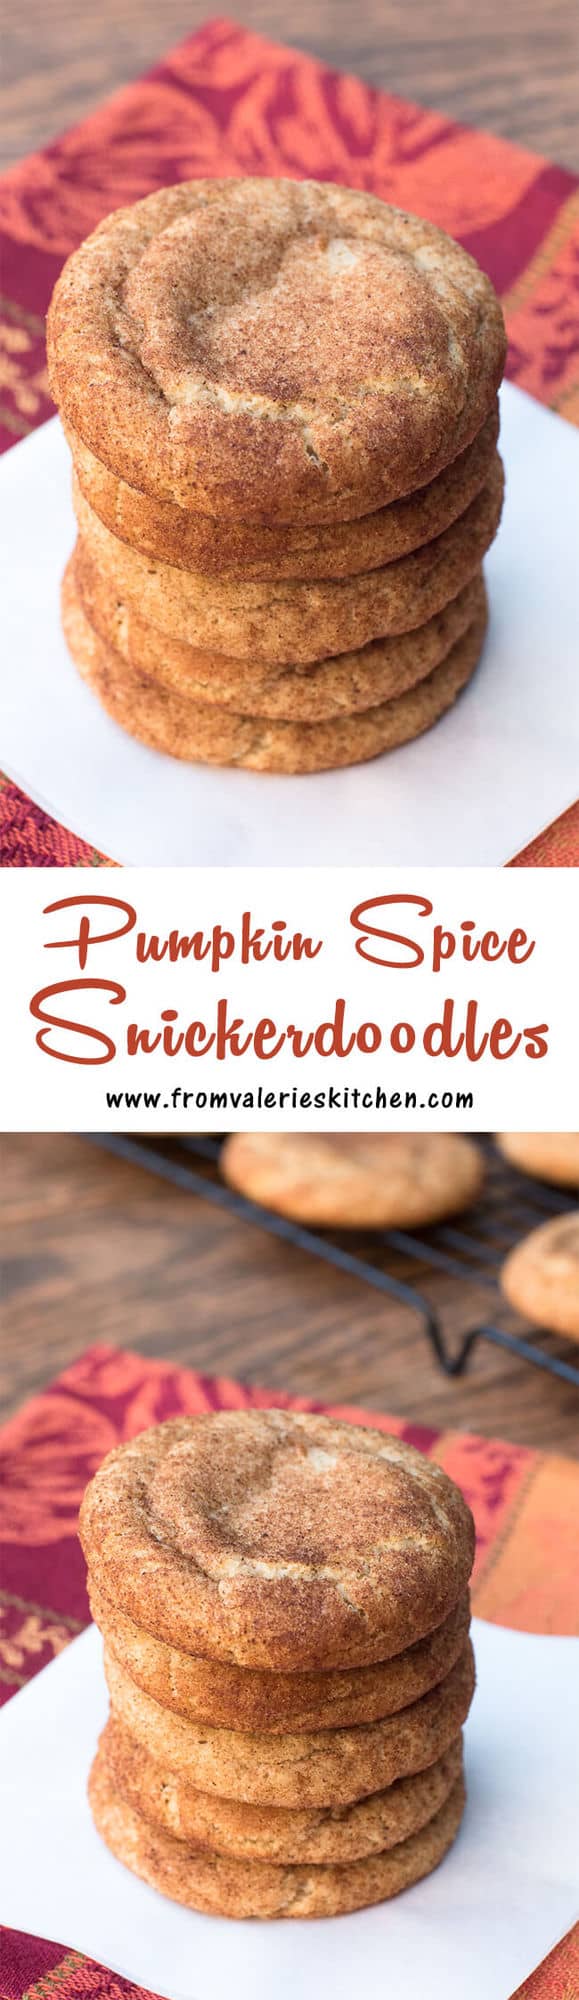 A two image vertical collage of Pumpkin Spice Snickerdoodles with overlay text.